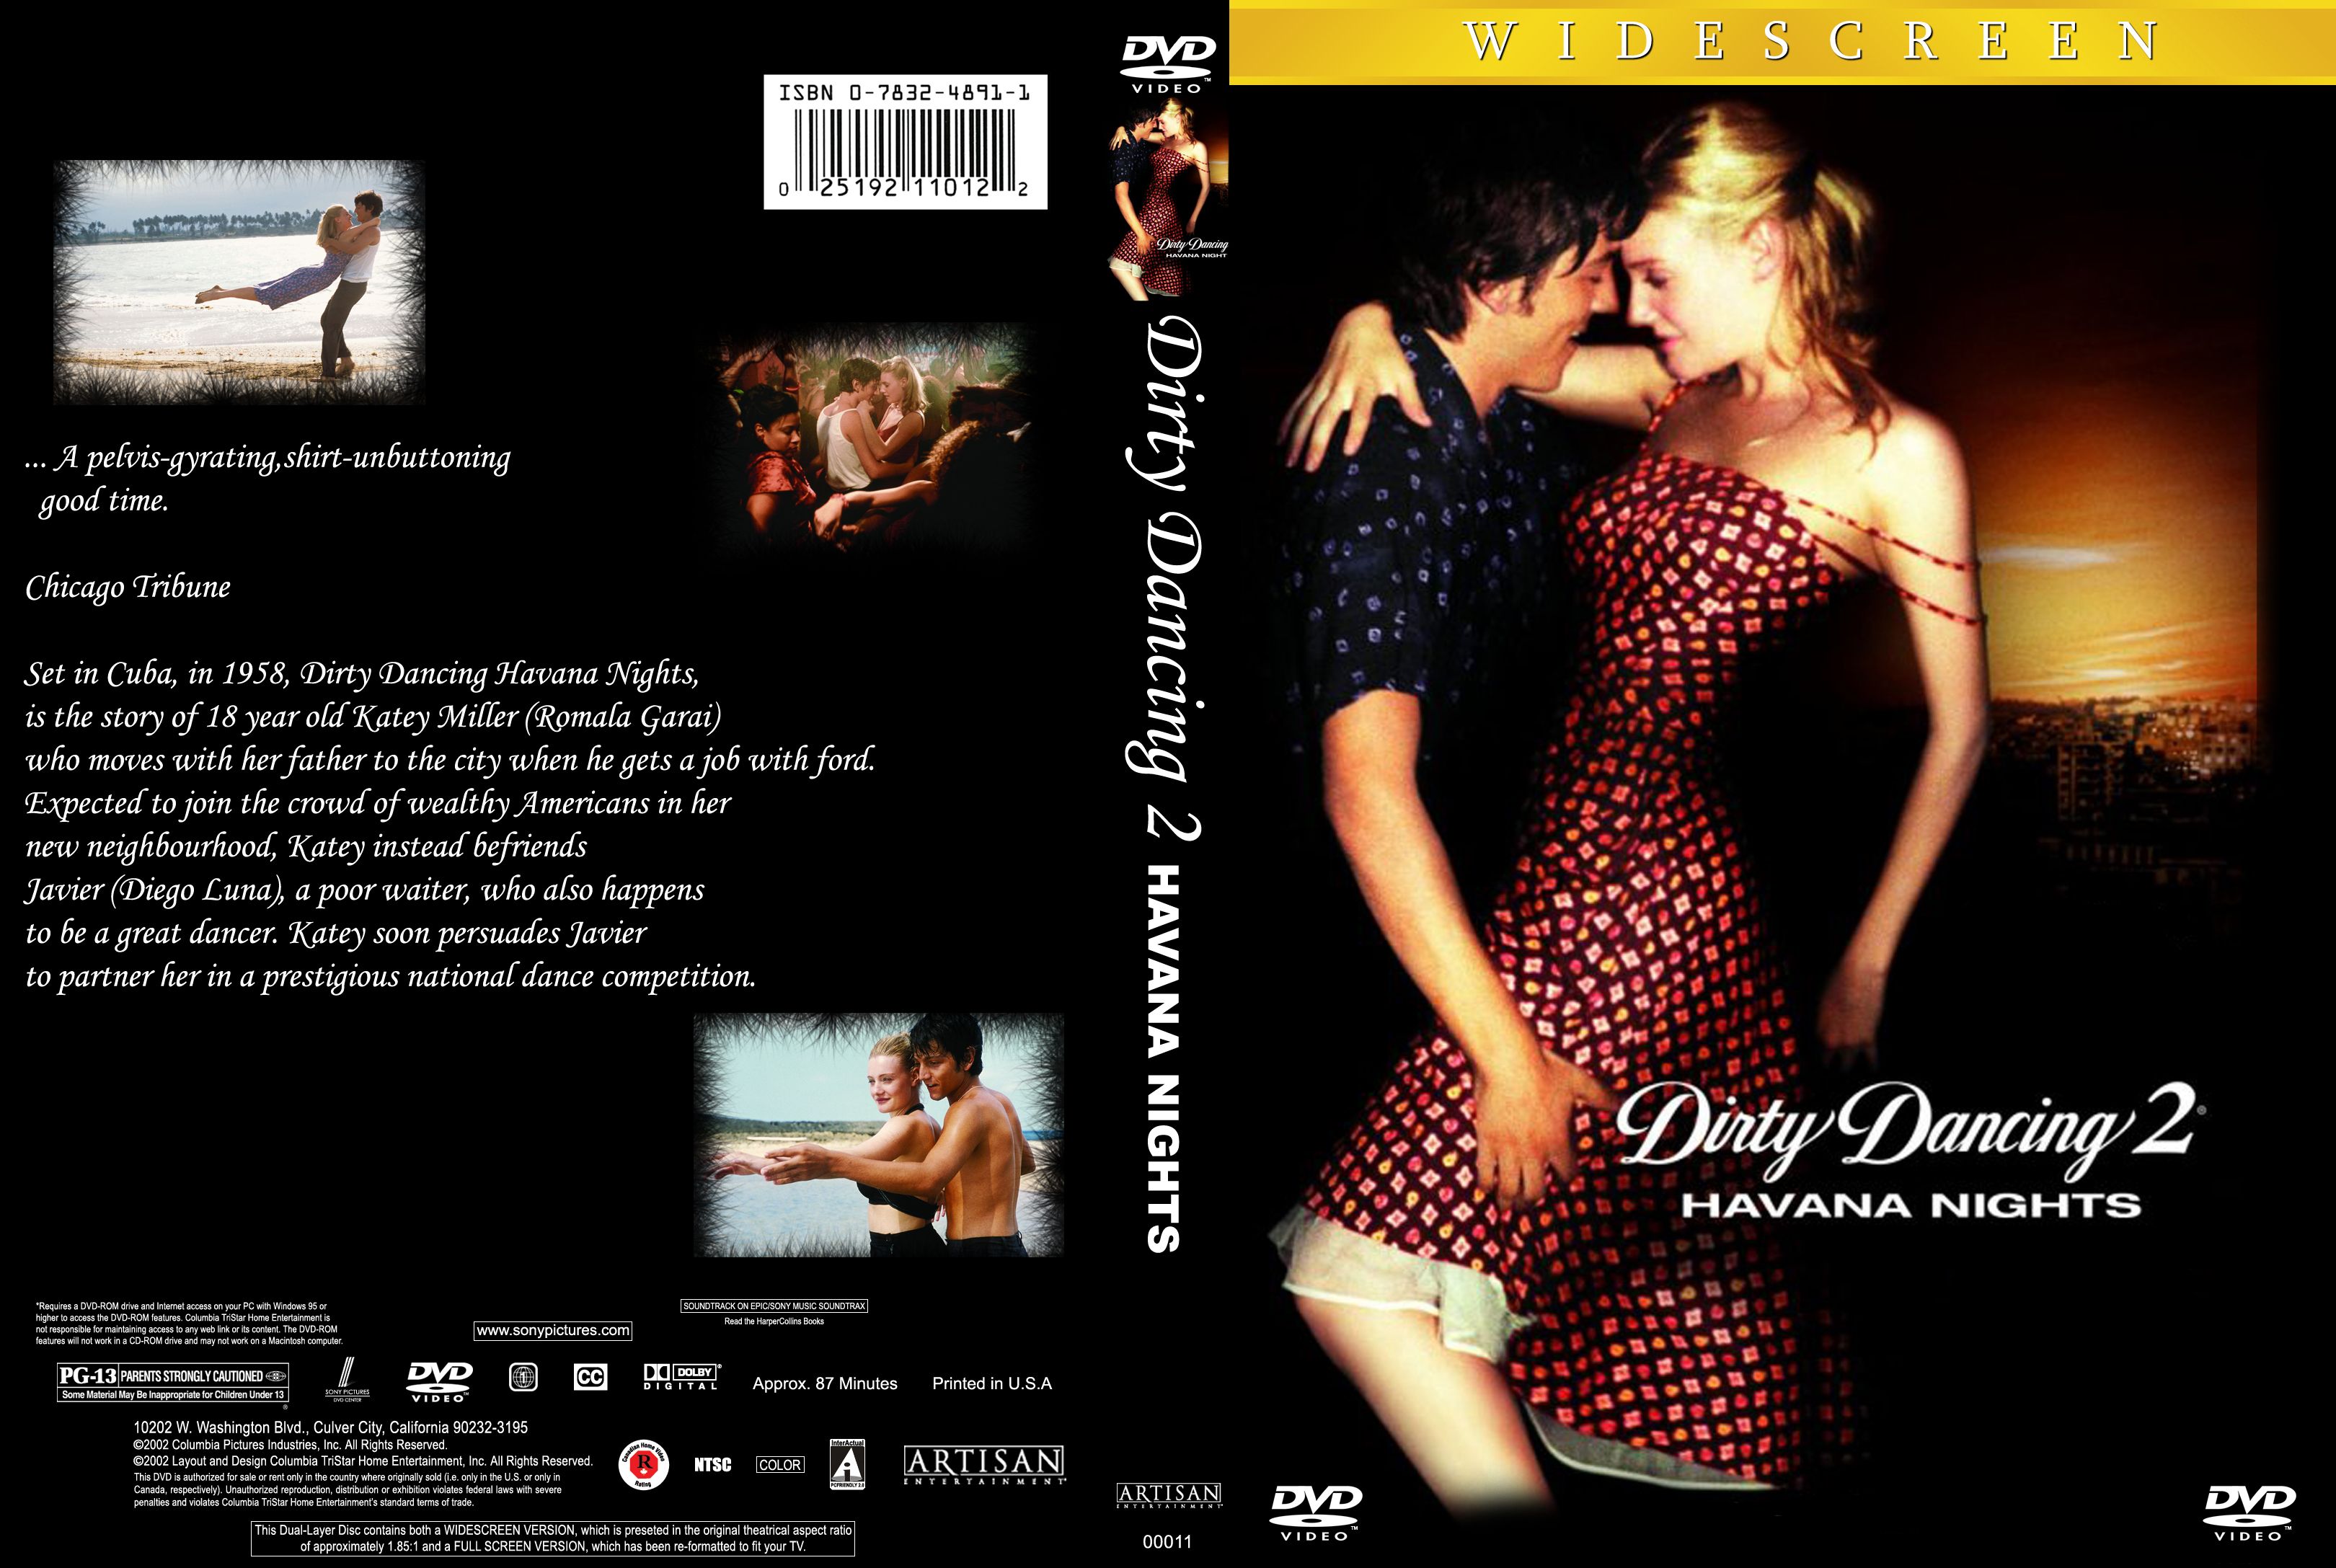 Dirty Dancing Havana Nights Better Quality R0 English Cstm Crayzie Misc Dvd | DVD Covers | Cover Century | Over 1.000.000 Album Art covers for free